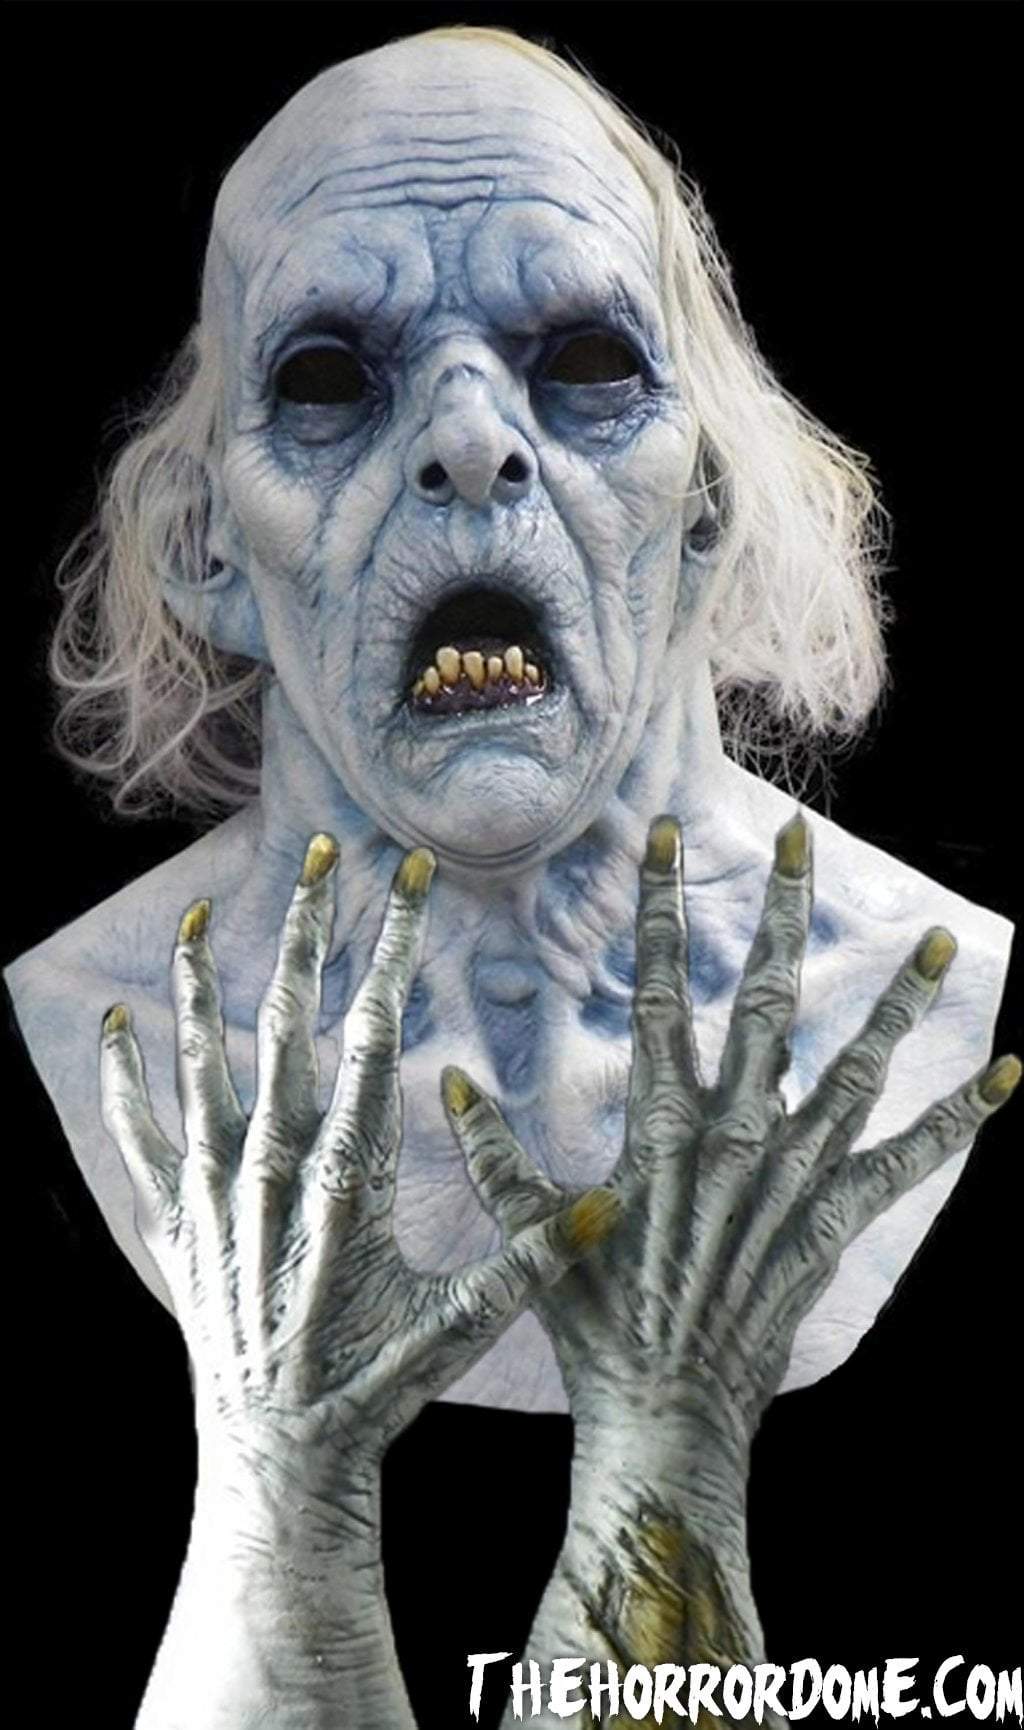 Halloween Mask "Male Apparation" HD Studios Pro Mask and Hands Set